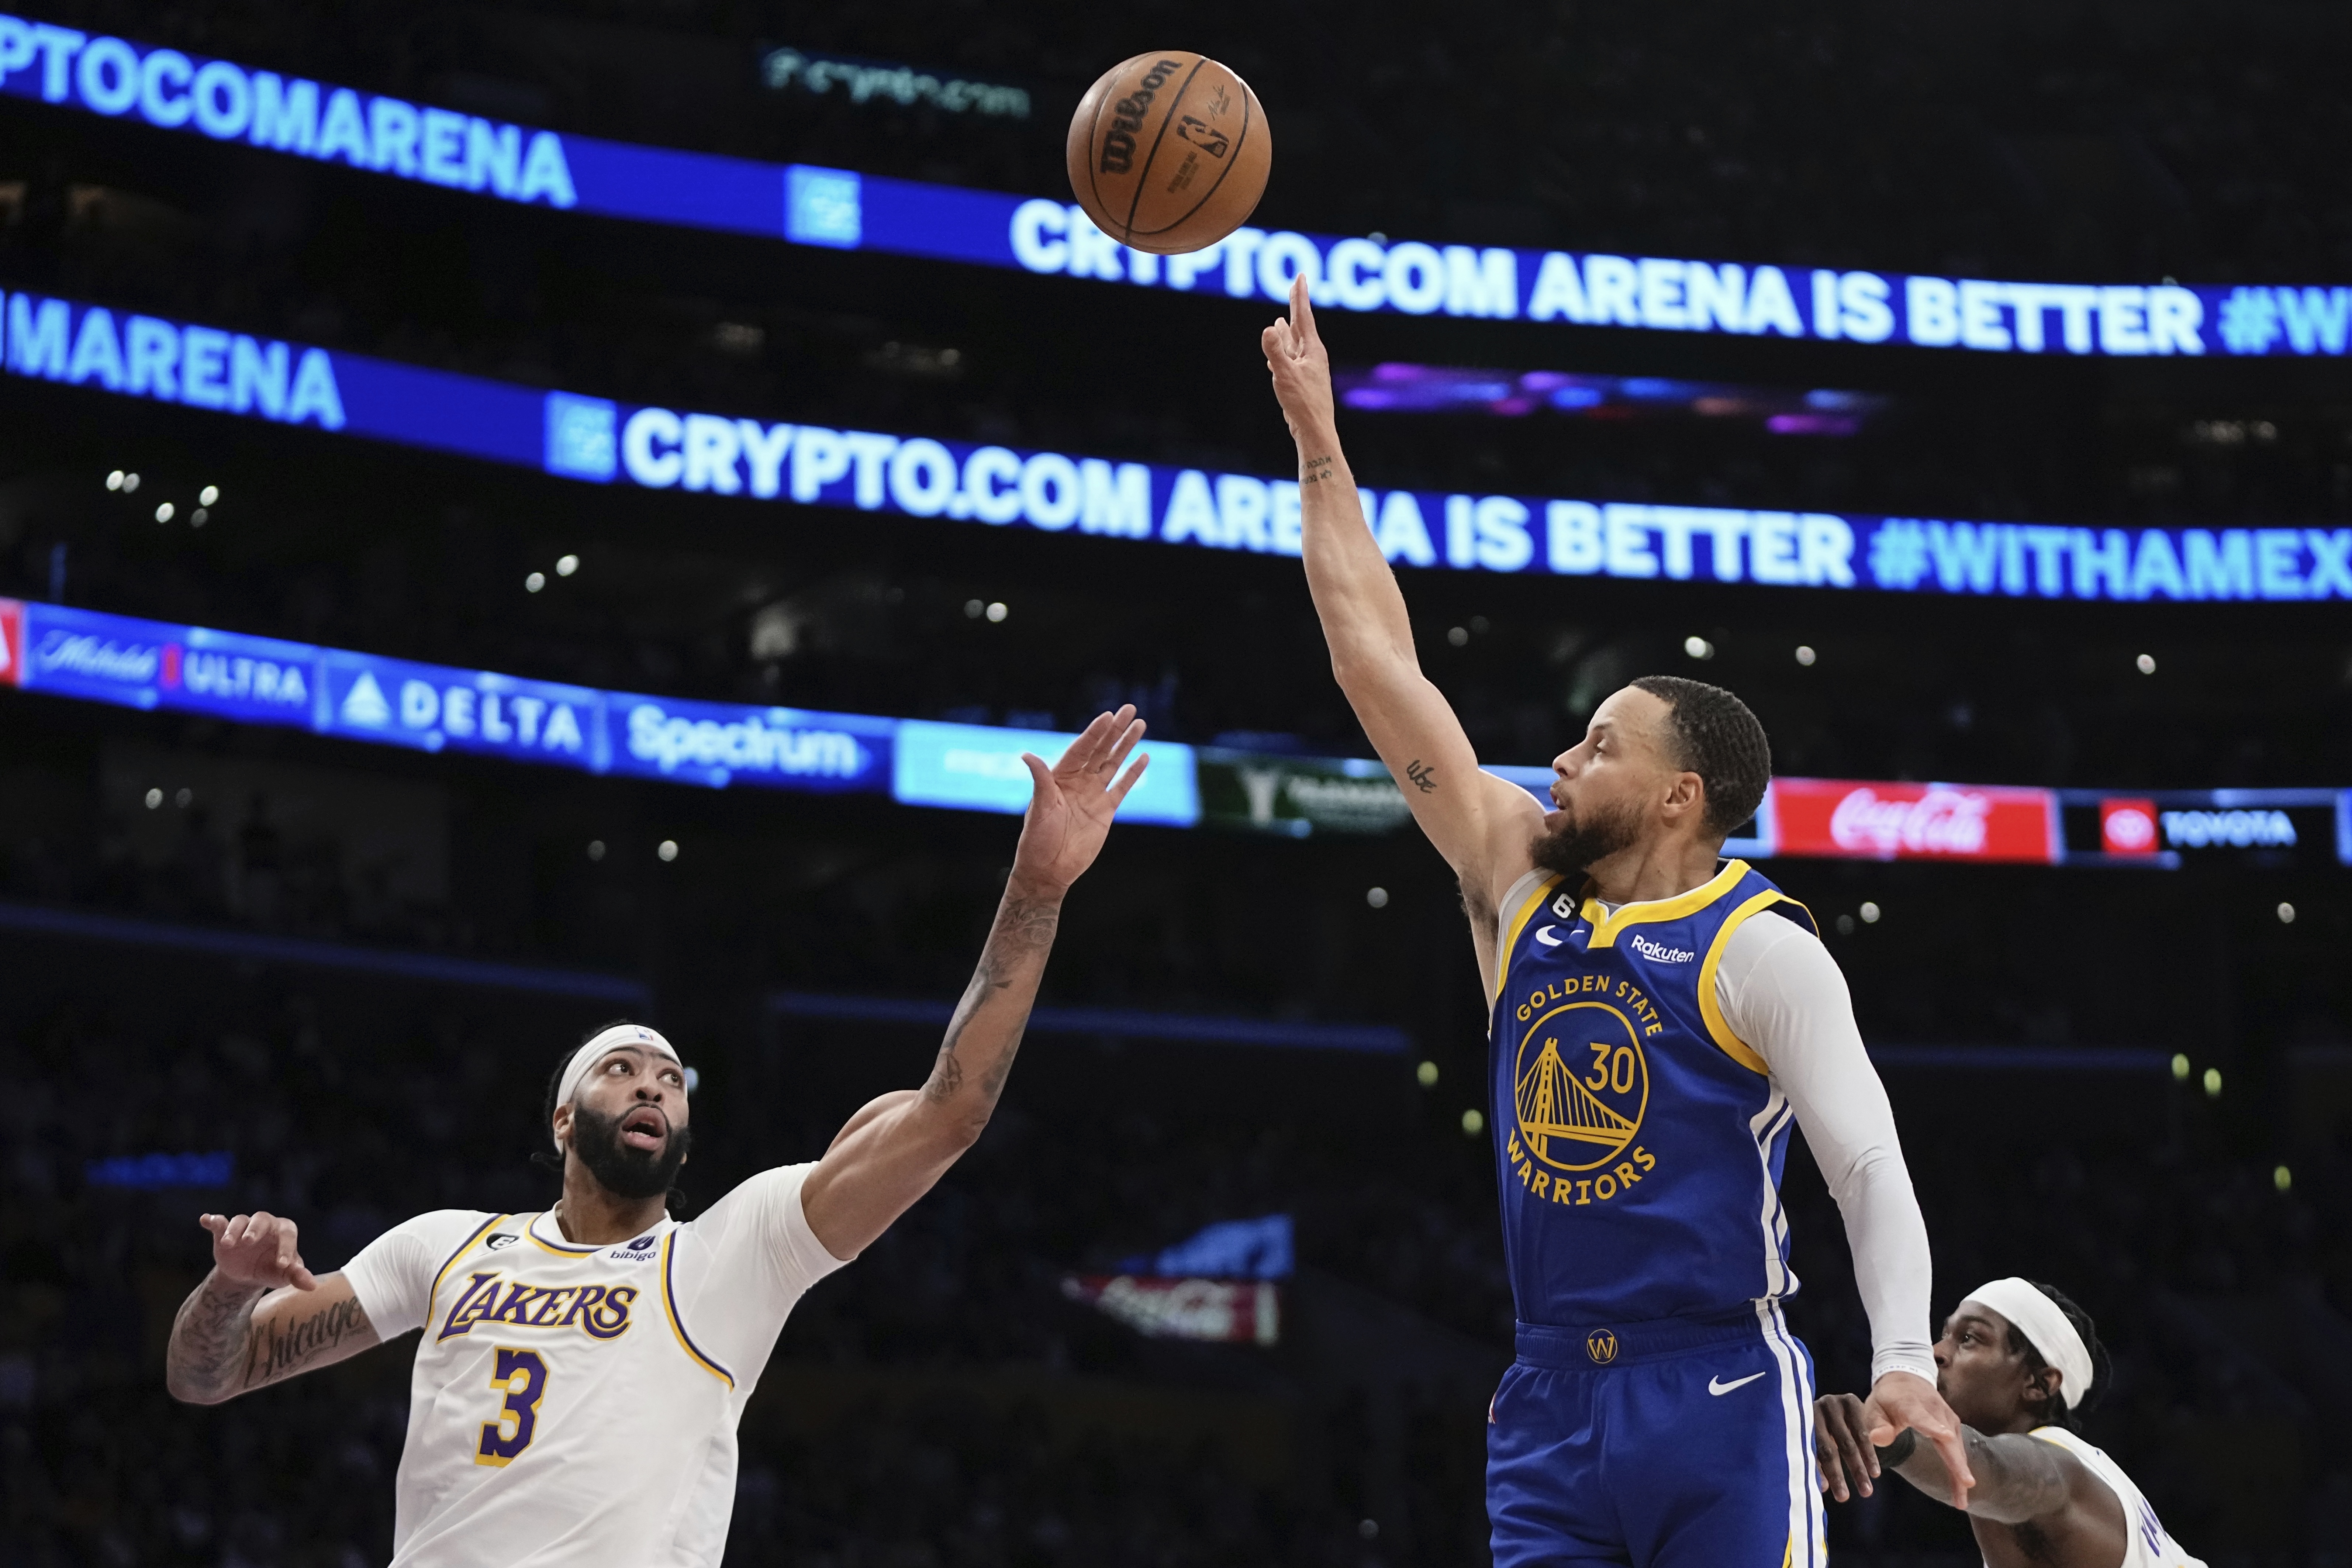 NBA: Former Laker dishes on LeBron James and Klay Thompson